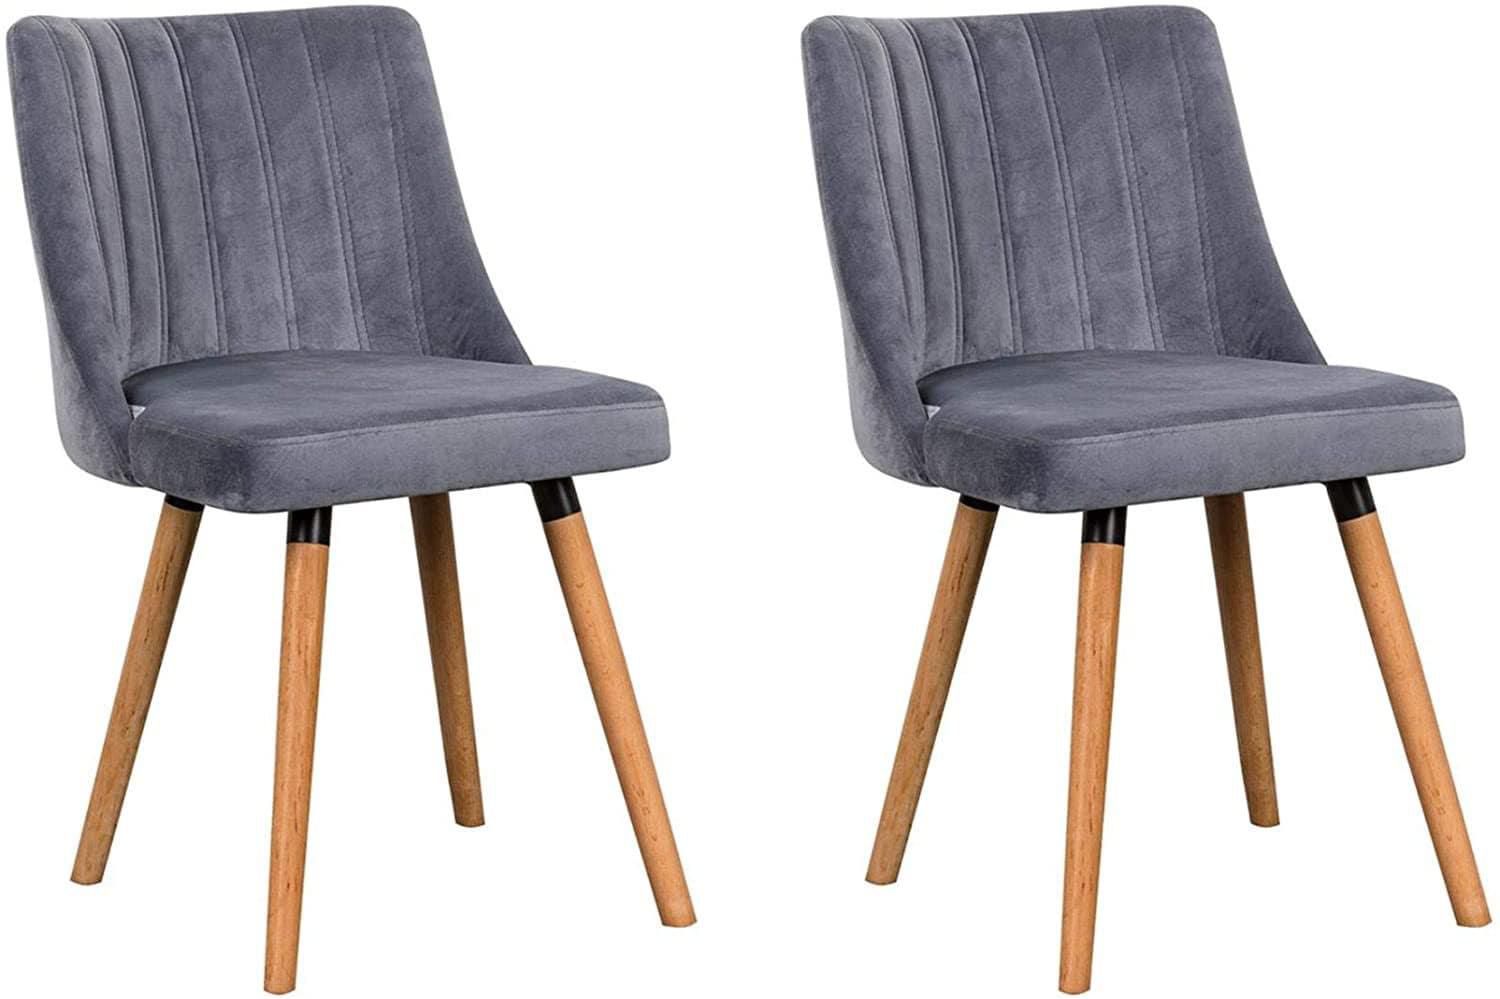 LANNY Set of 2 Midcentury Modern Living Room Chair T859 Leisure upholstered Fabric Dining Room Chair, Dressing Room, Dark Grey